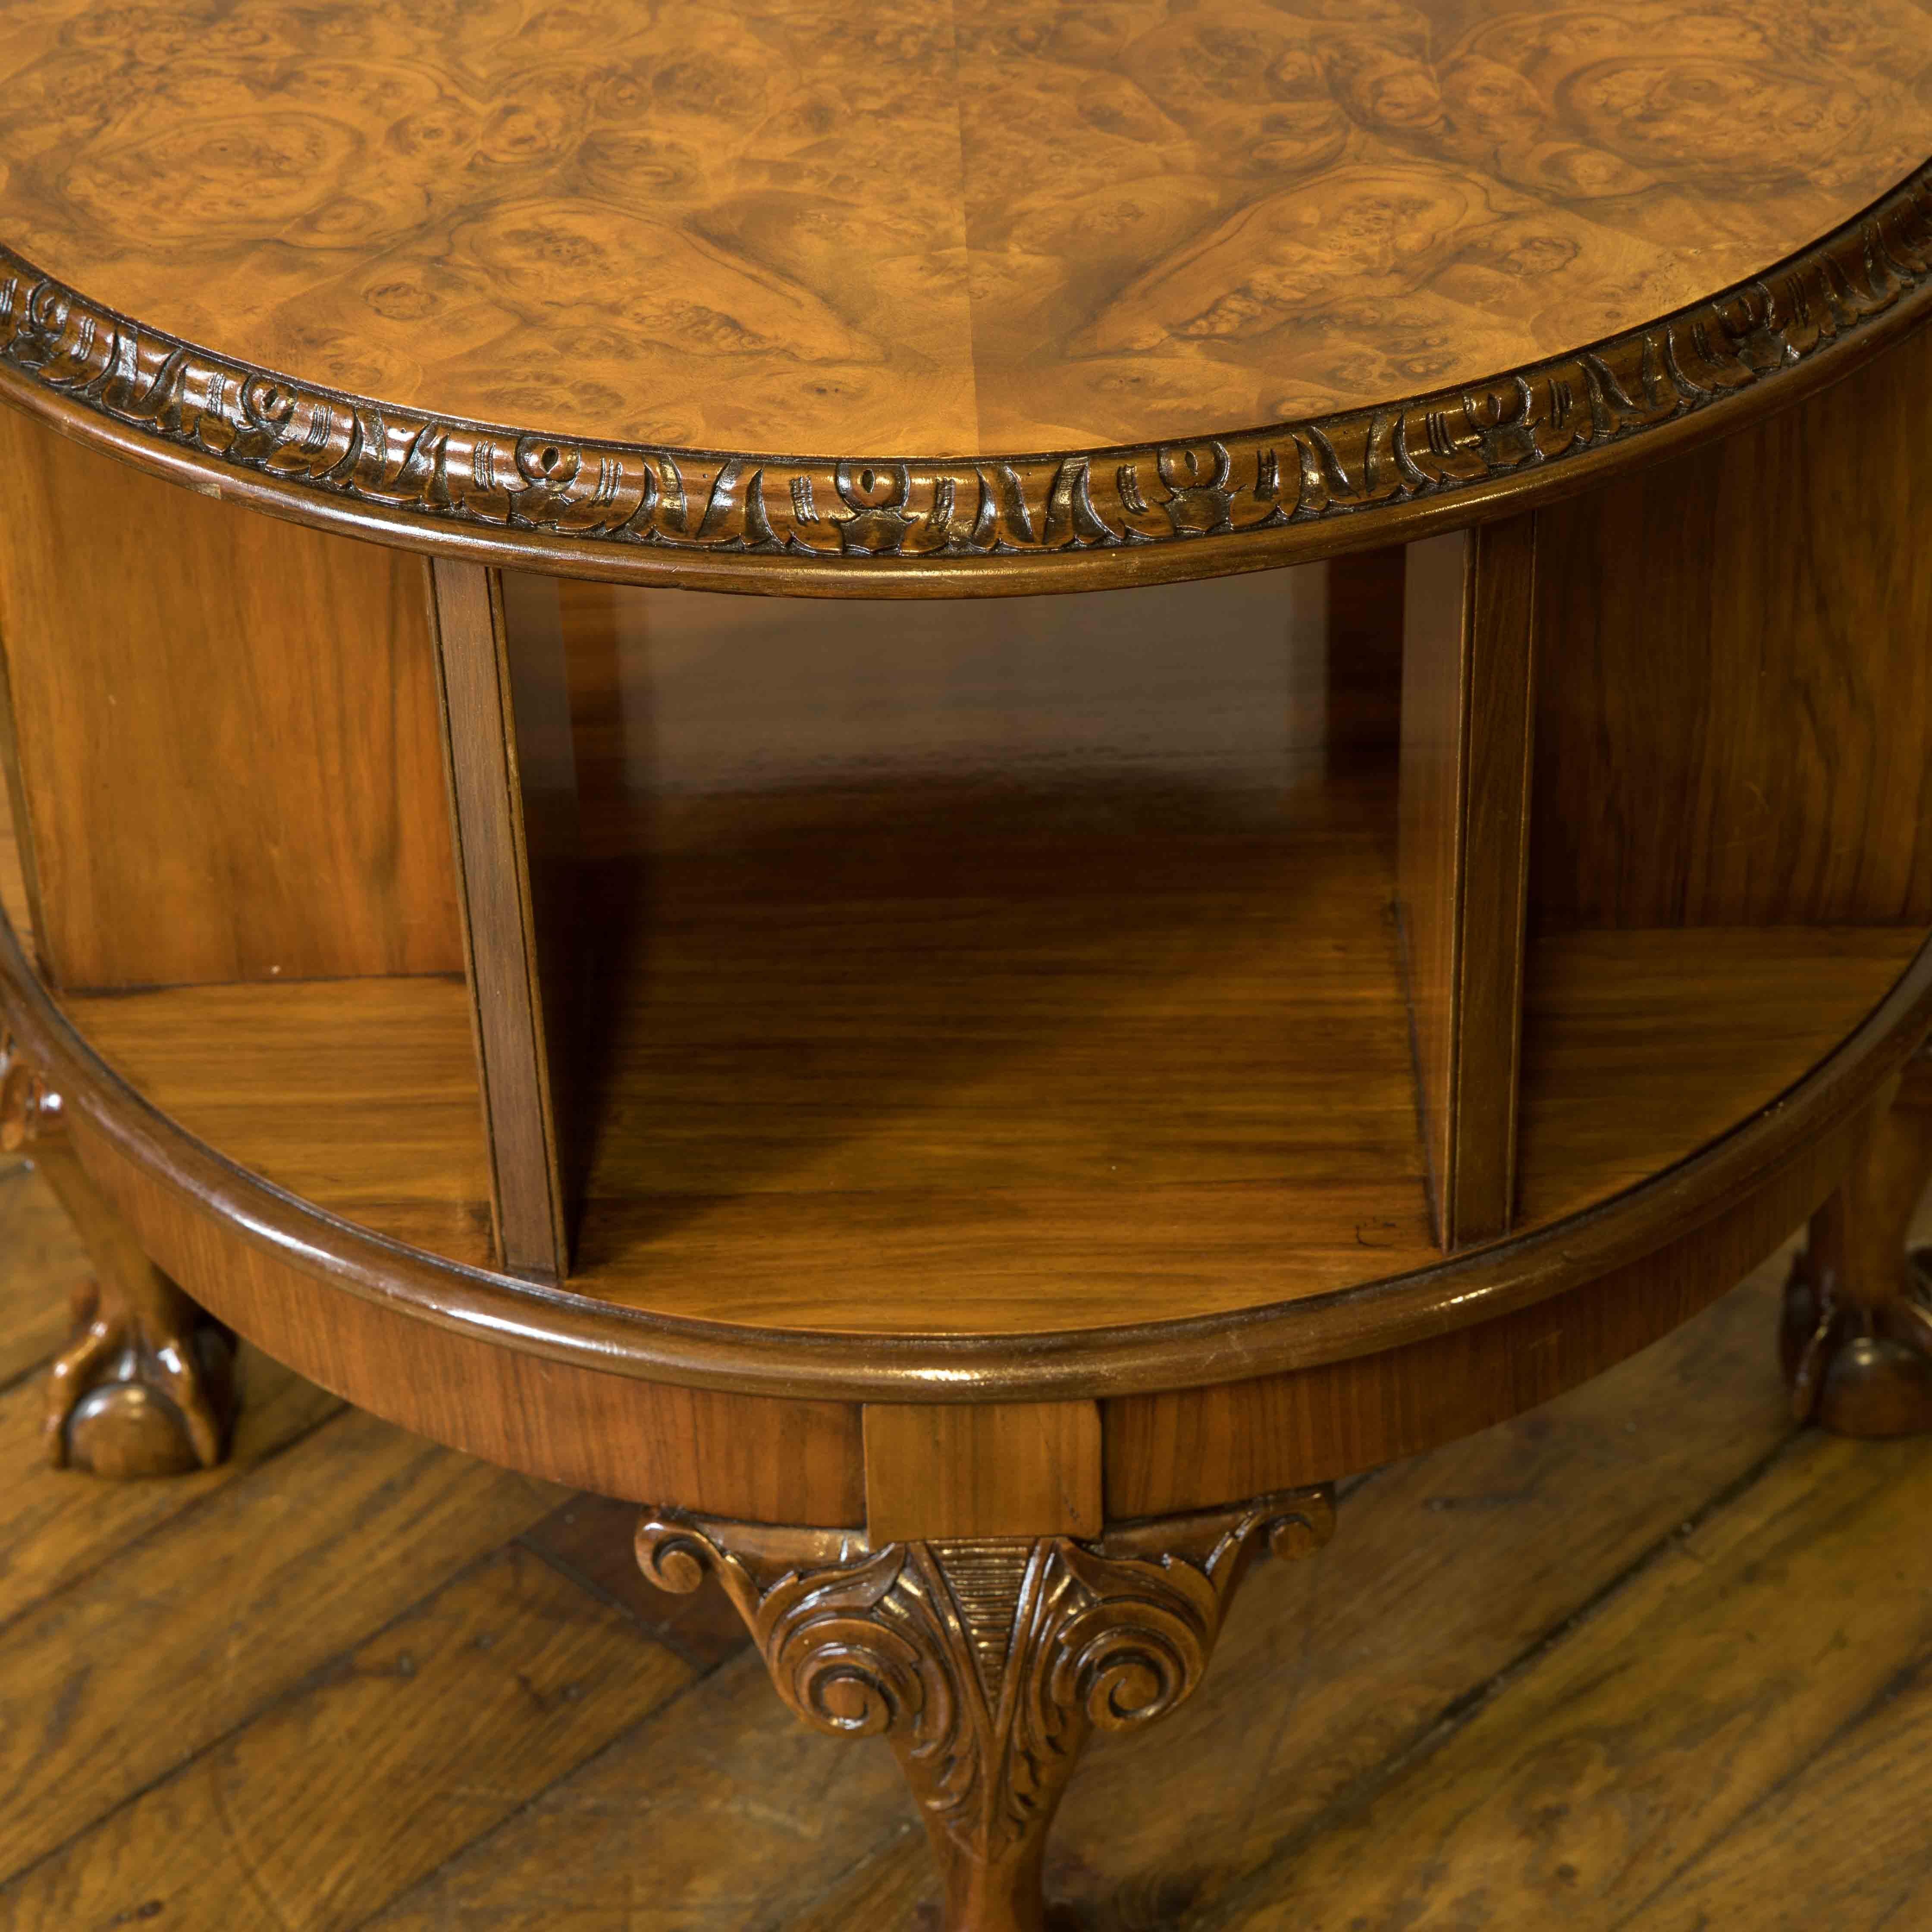 Super quality occasional table that has a revolving bookcase undercarriage. Made from walnut, with a wonderful burr walnut top, the design has a strong Chippendale influence. An unusual piece that is both utilitarian and attractive at the same